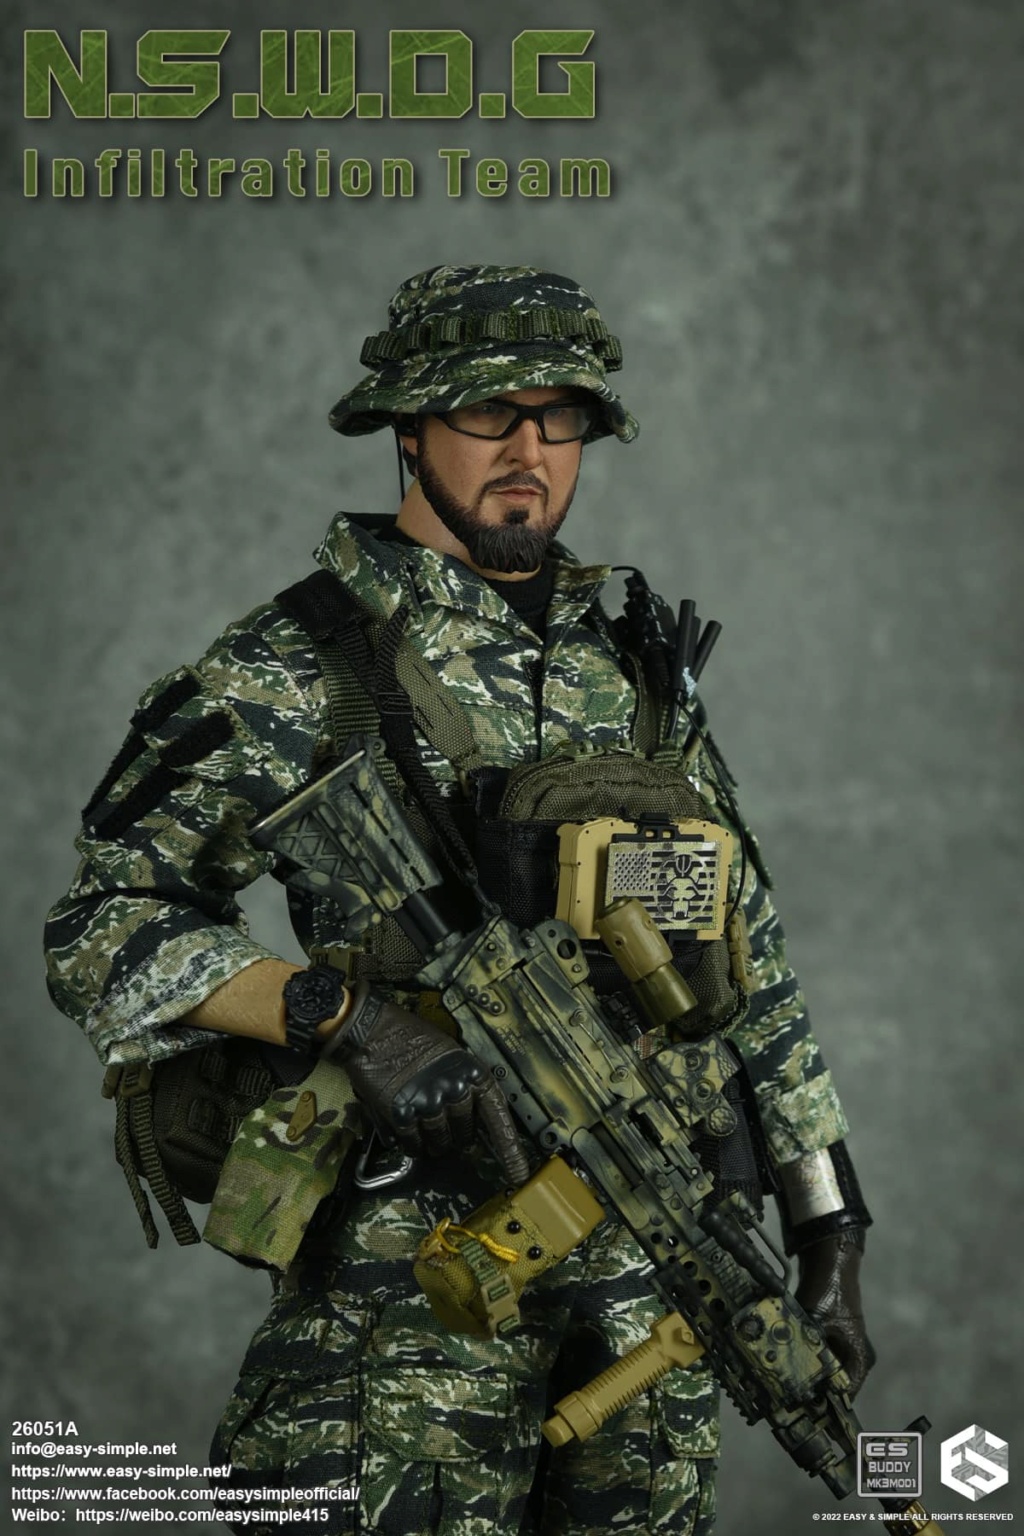 ModernMilitary - NEW PRODUCT: EASY AND SIMPLE 1/6 SCALE FIGURE: N.S.W.D.G INFILTRATION TEAM - (2 Versions) 16371